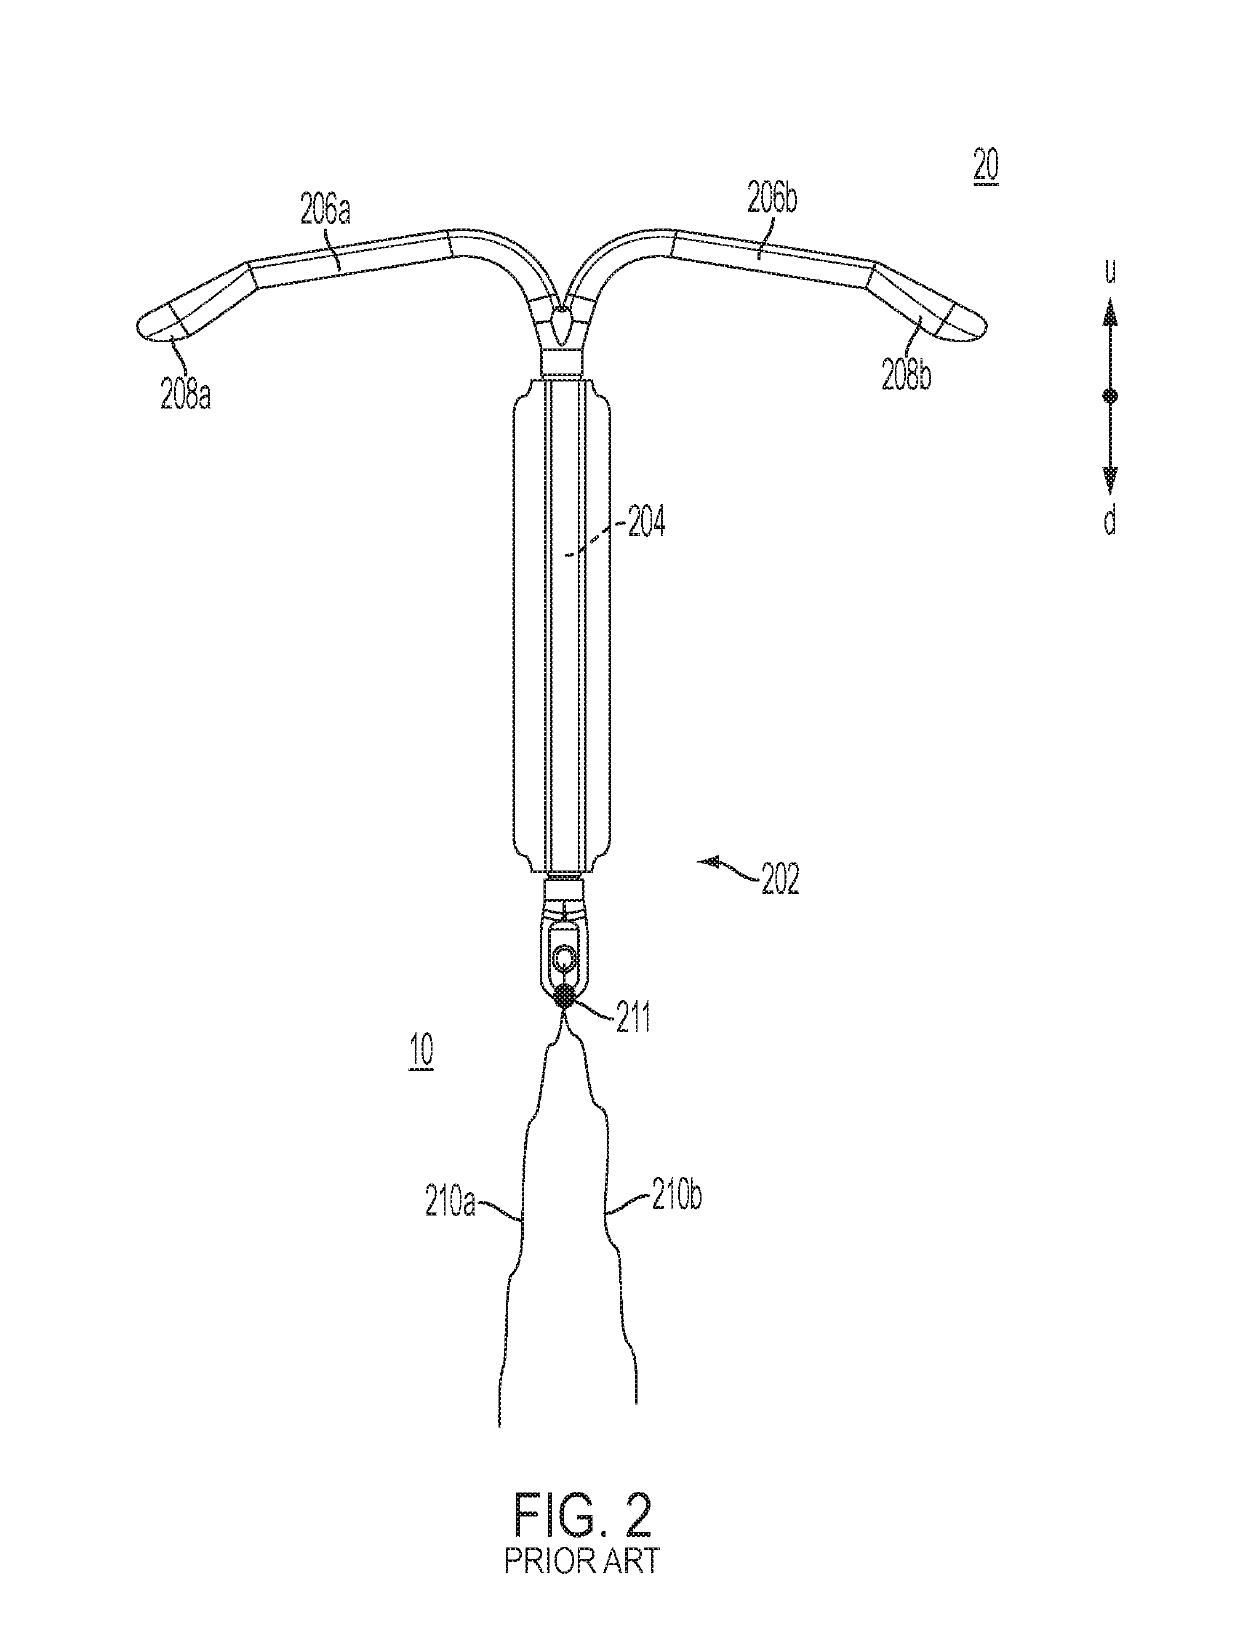 Iud insertion devices, and related methods and kits therefor